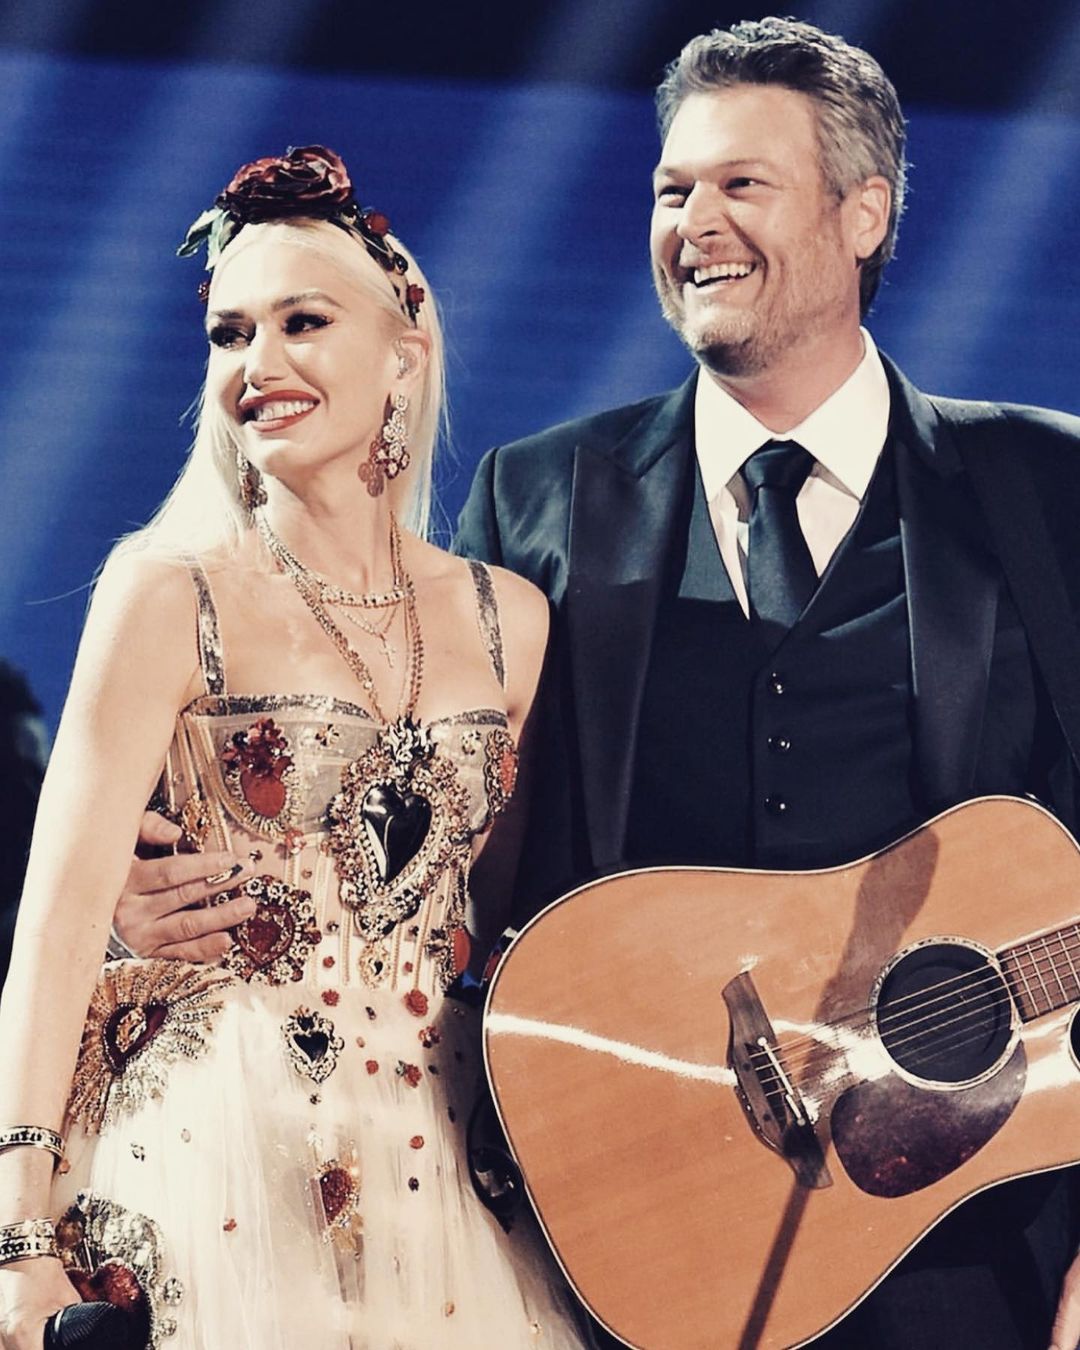 A picture of Gwen Stefani and fiance Blake Shelton together on stage looking happy after a performance.